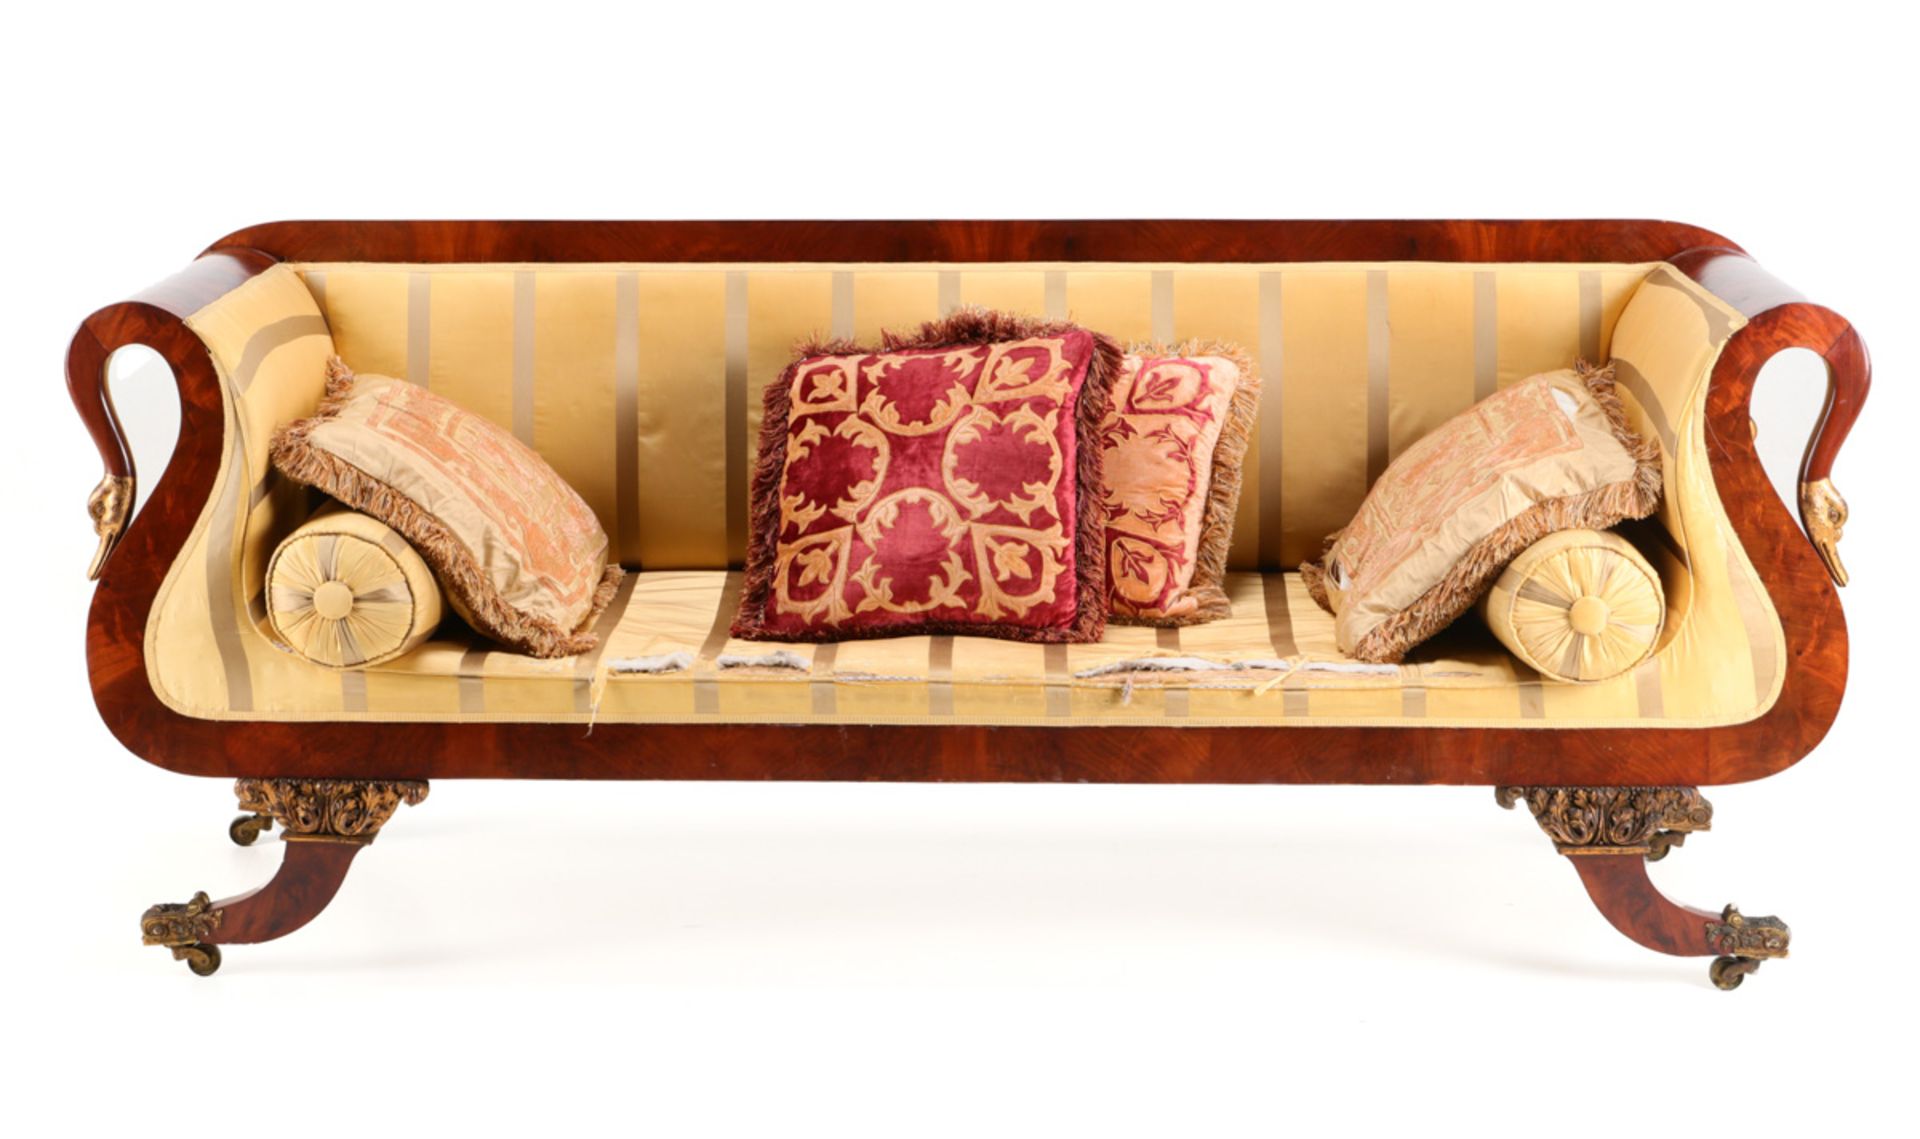 A REGENCY SOFA Cuban mahogany, arms ending in gilded swans heads. Silk lined. Zoomorphic bronze feet